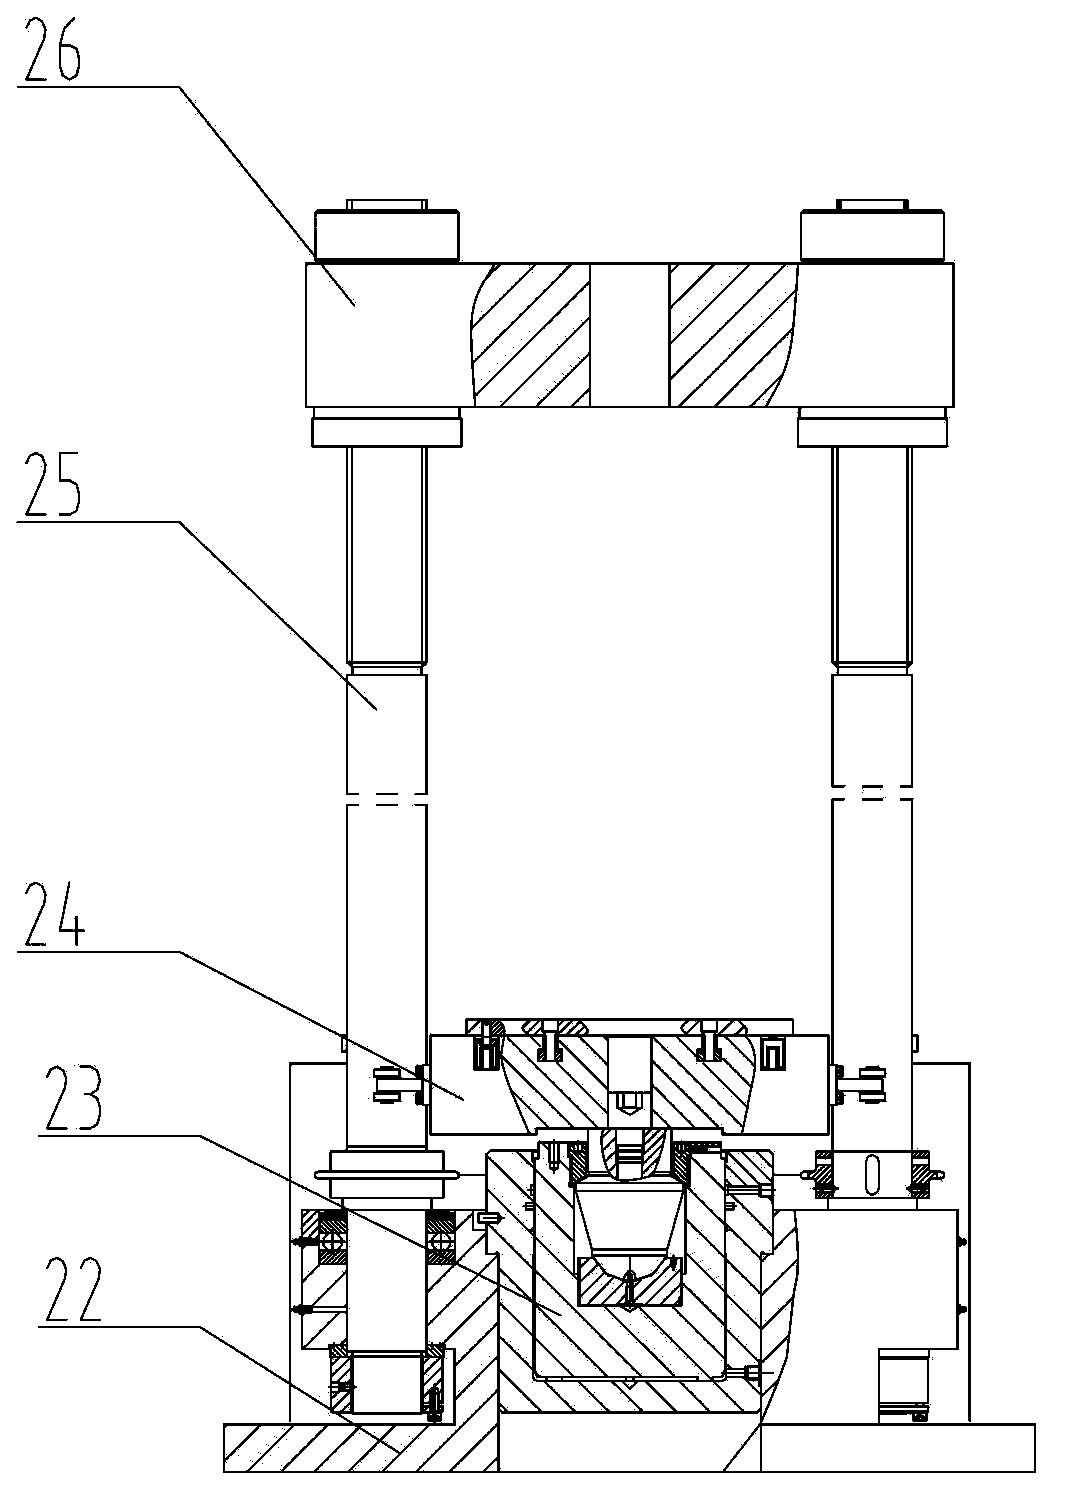 Inspection and repair line and method for bumper of coupler of motor train unit